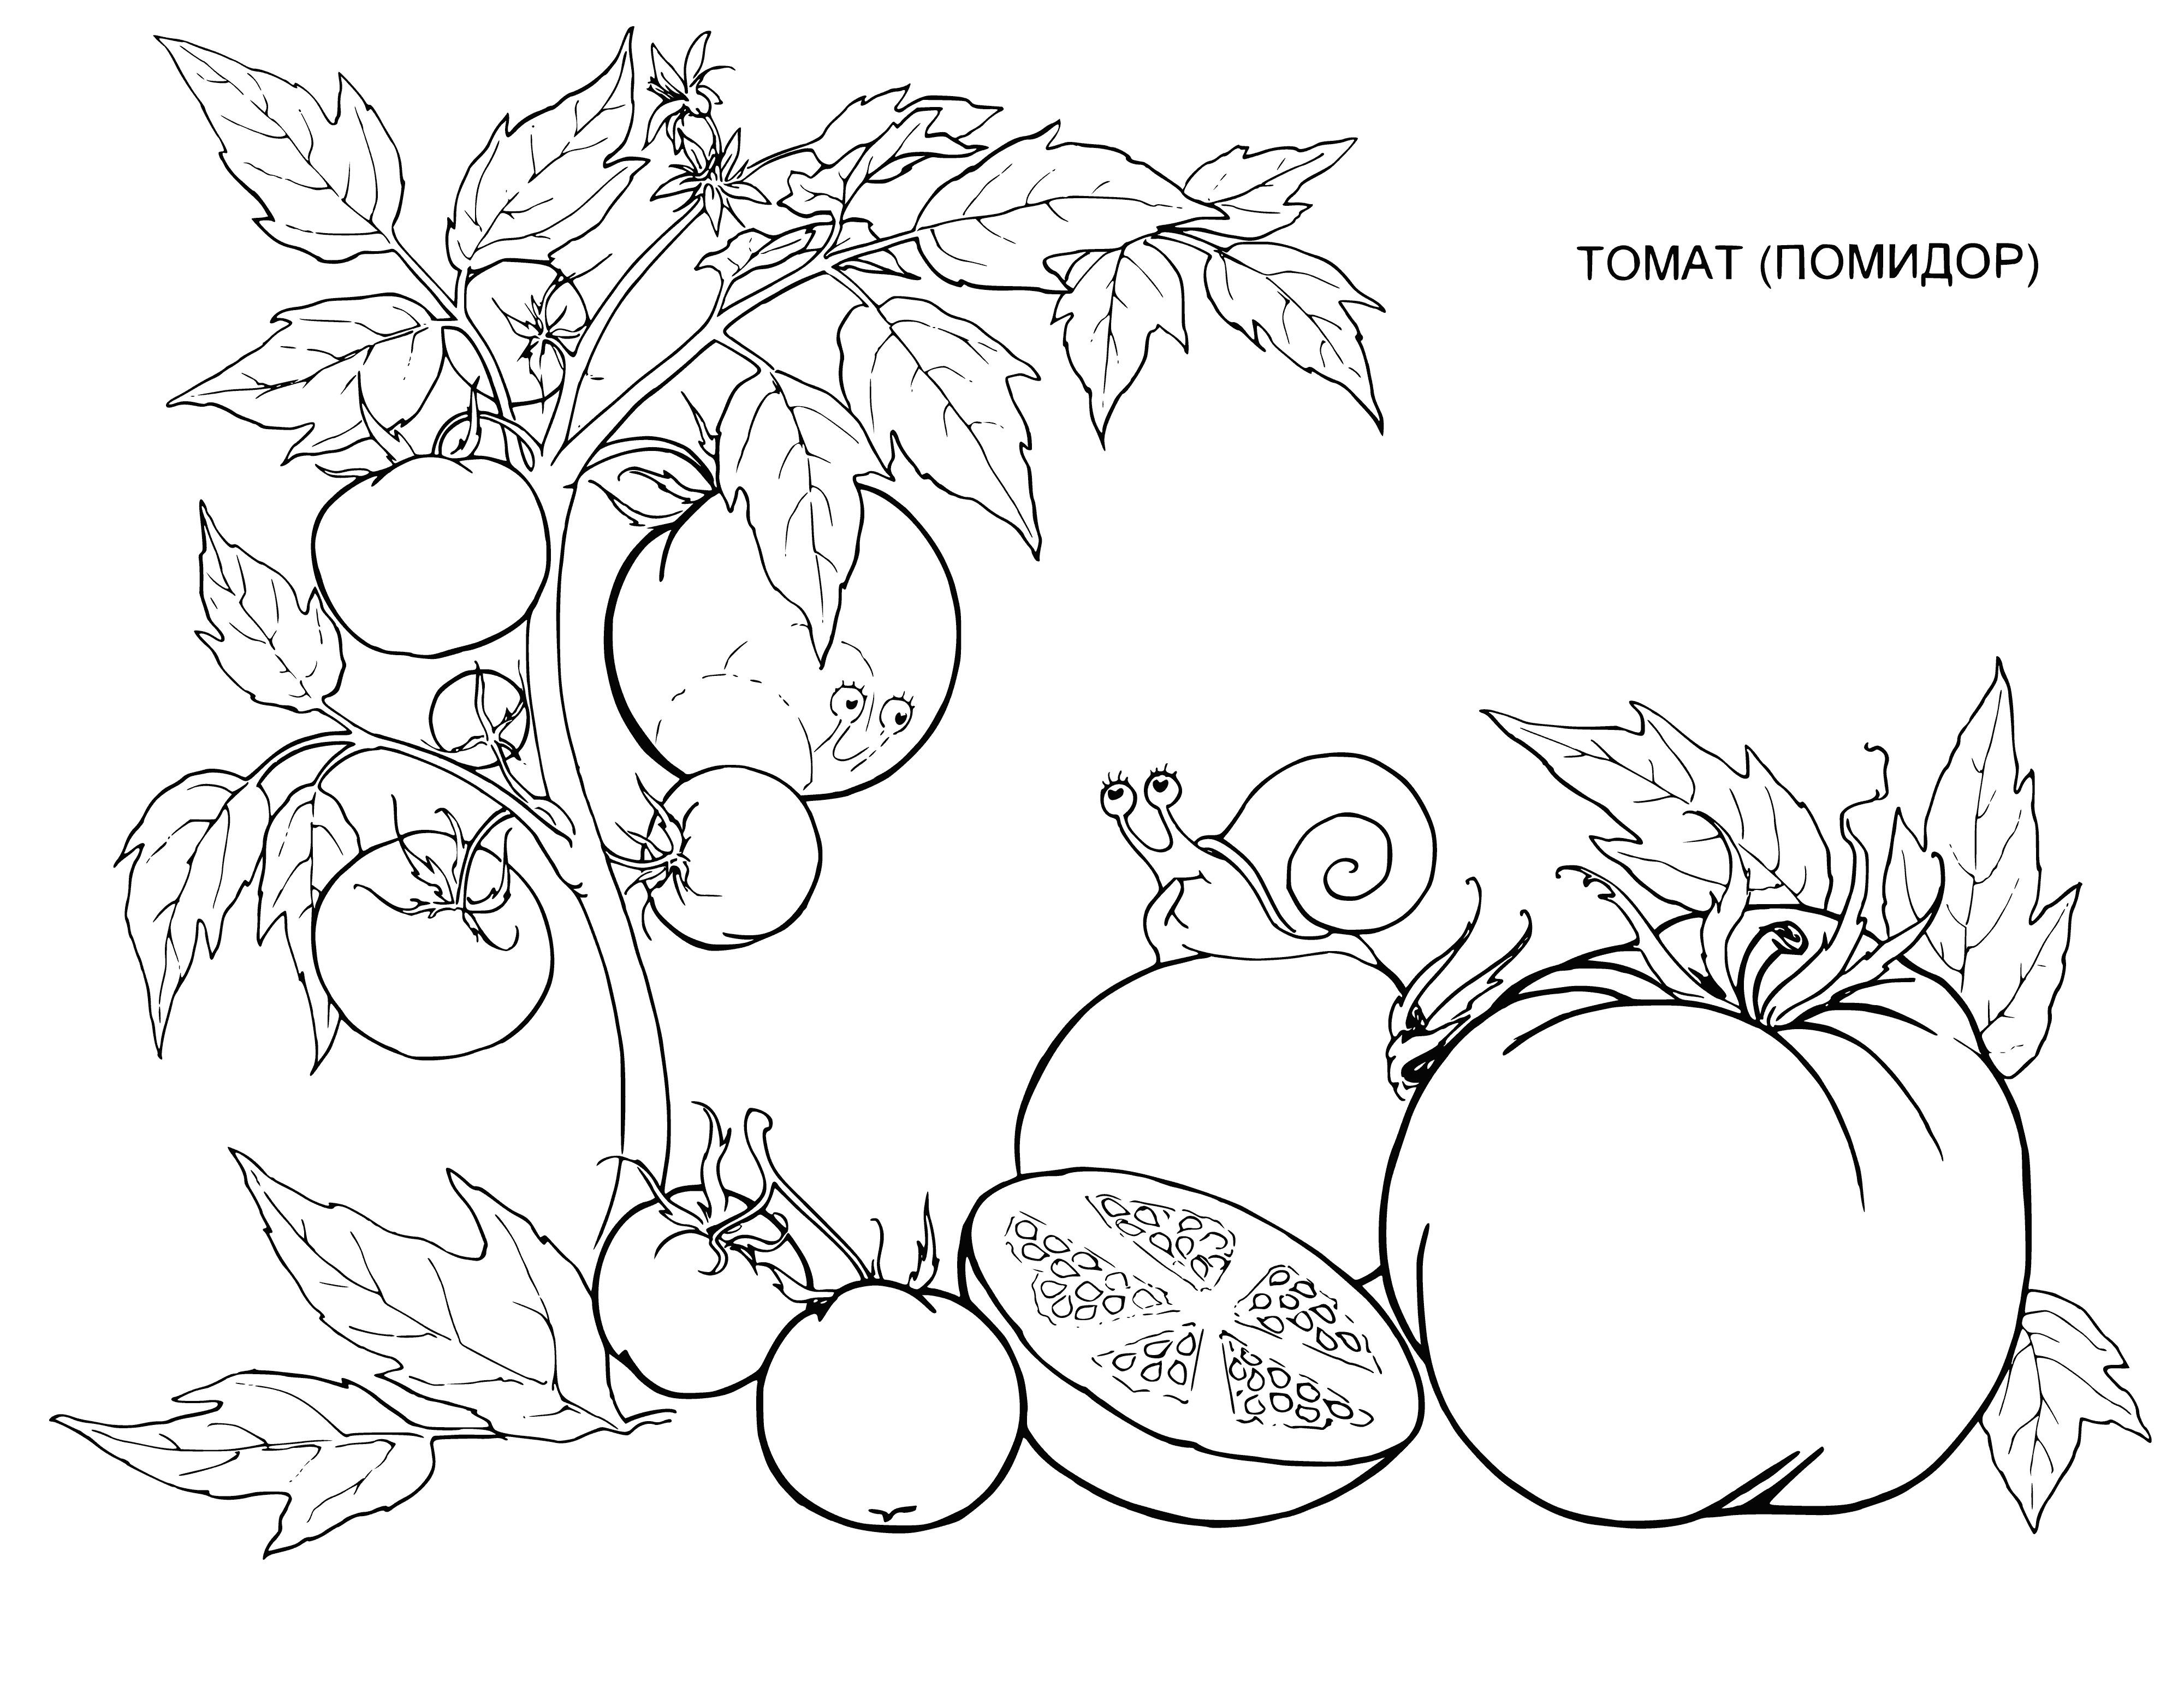 coloring page: Color a red tomato, filled w/ seeds & juice, commonly eaten in salads, sandwiches, & on pizza.